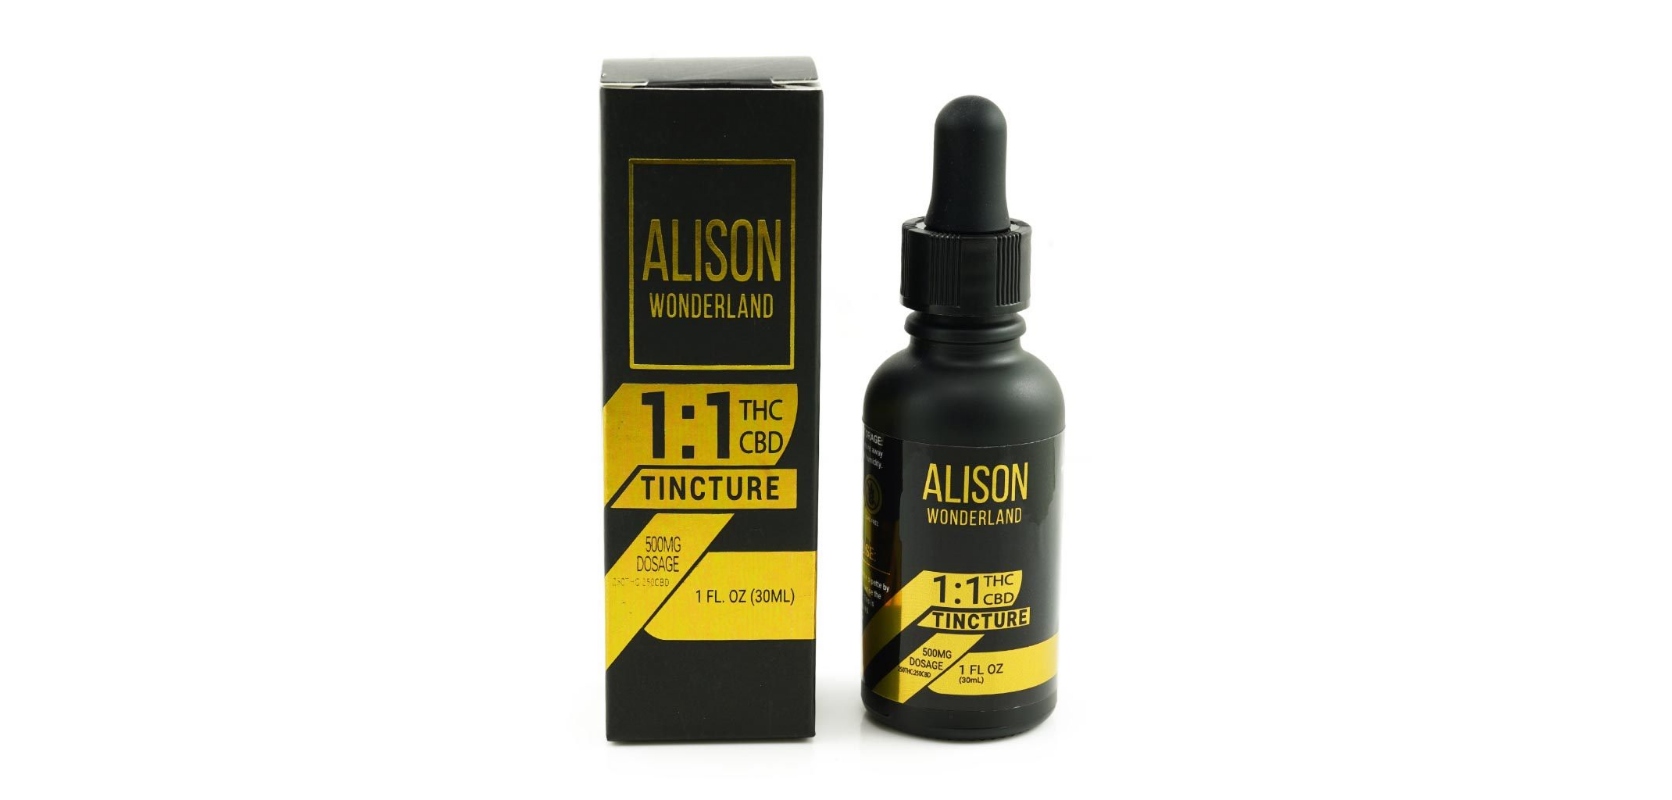 If you’d like to experience the wonderful effects of Alison Wonderland, be sure to buy 500mg THC Tincture from our weed dispensary now.